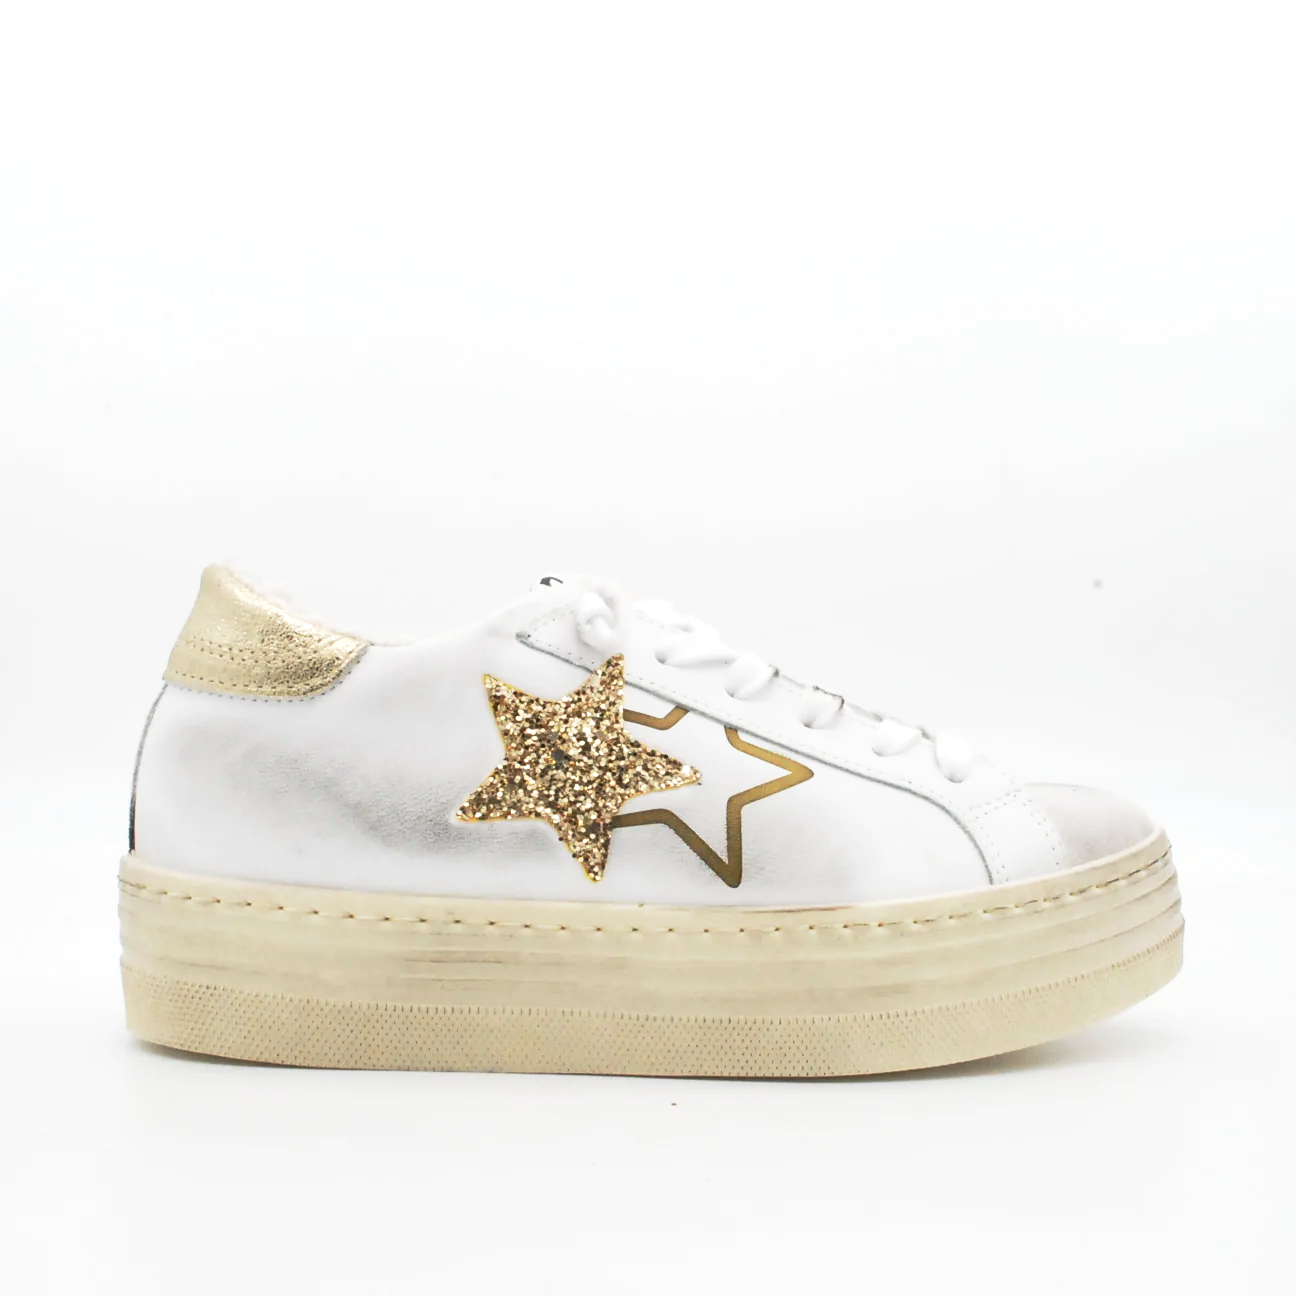 sneakers-2star-one-star-in-pelle-sneakers-6_82d24ab3-1d7f-4aa3-ab57-14a8768e5f75.png